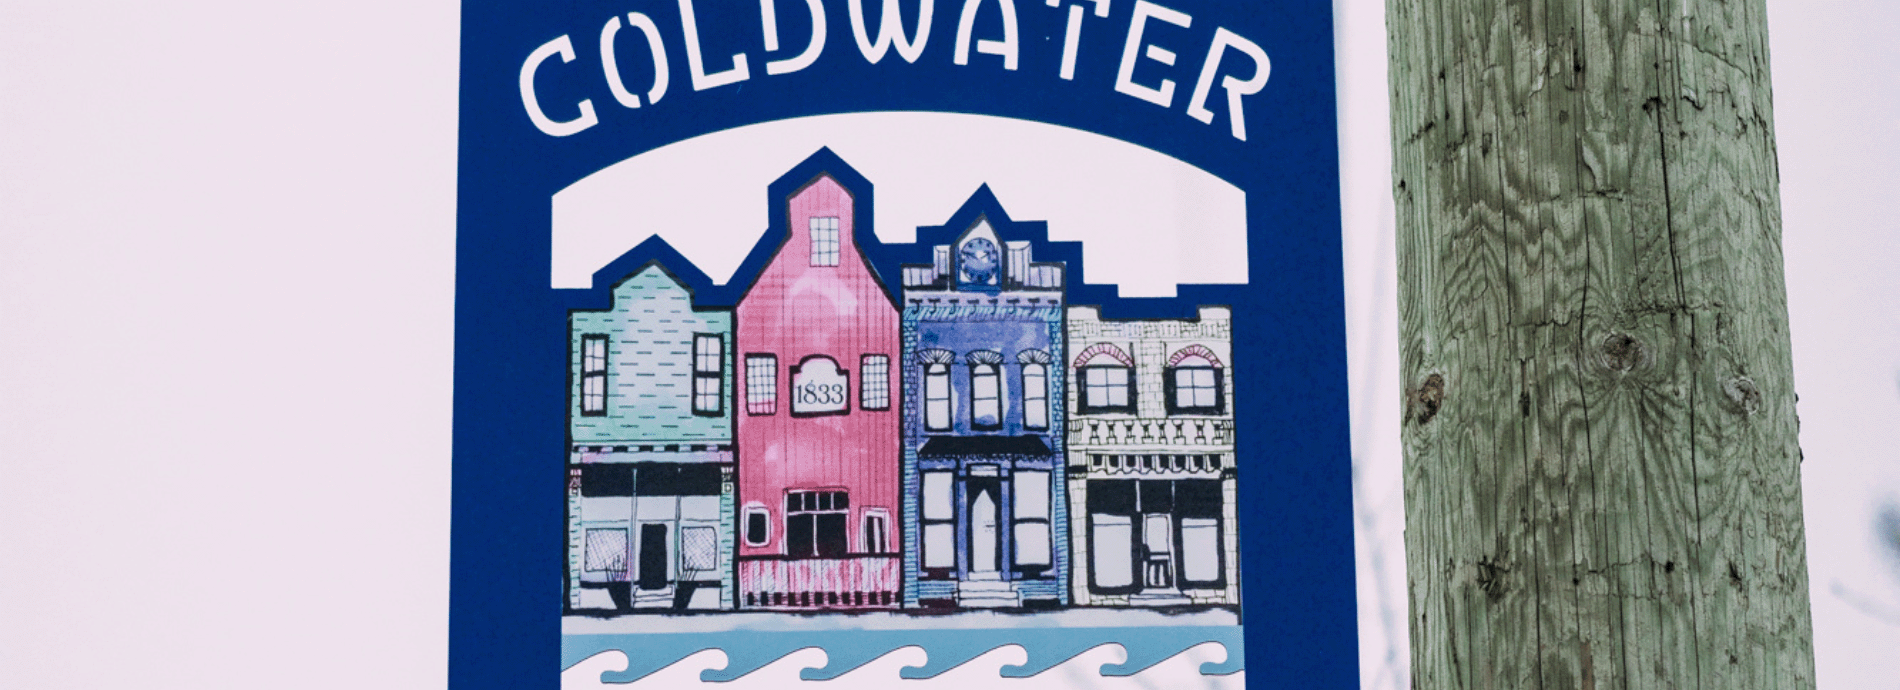 Coldwater street banner